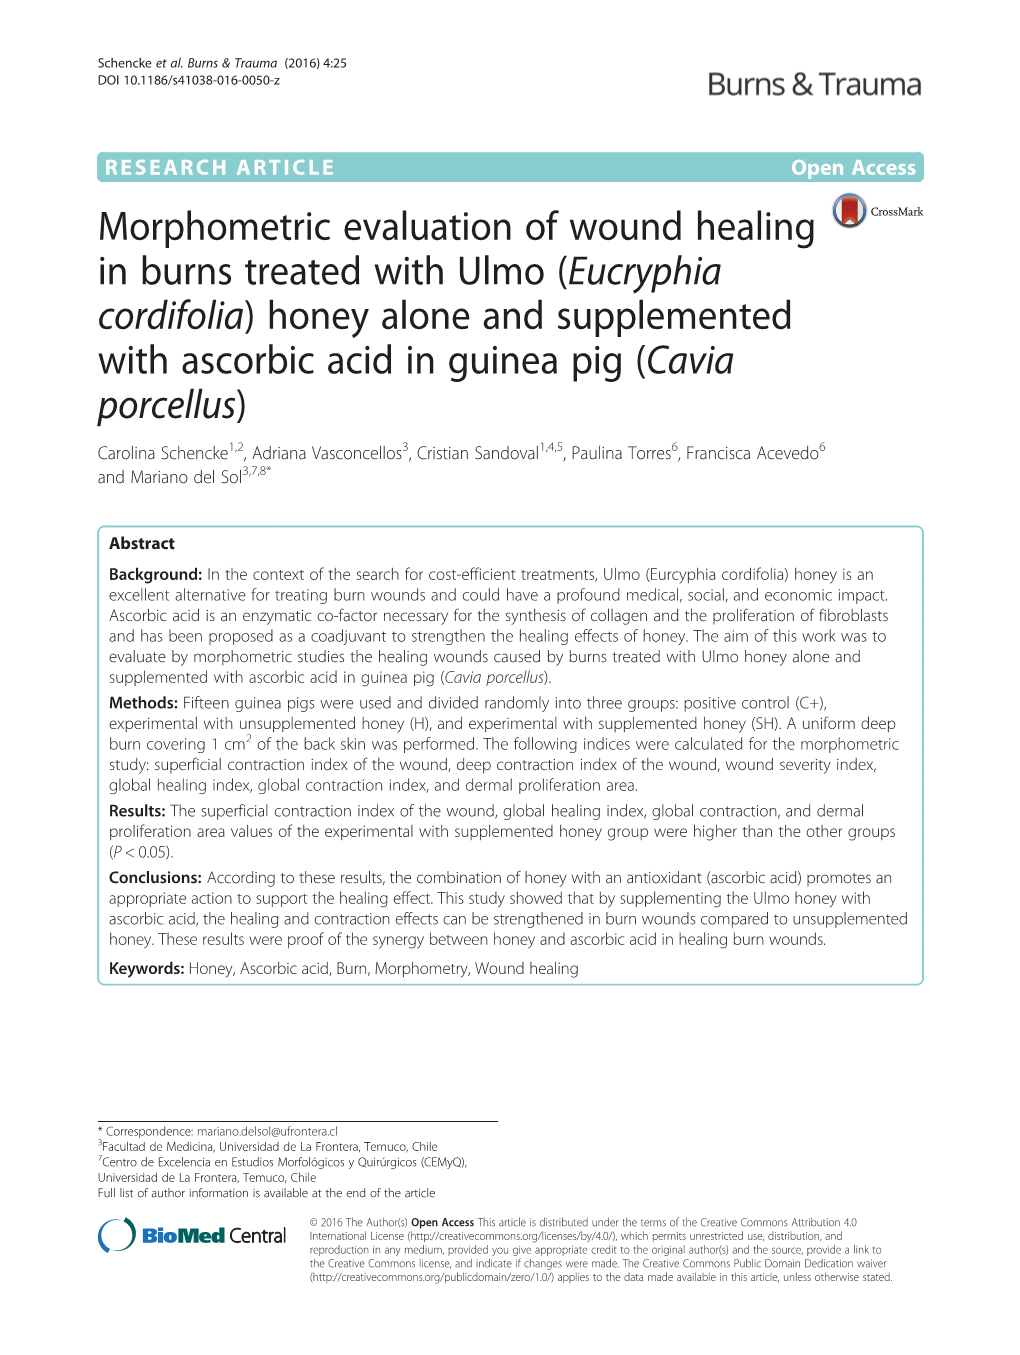 Morphometric Evaluation of Wound Healing in Burns